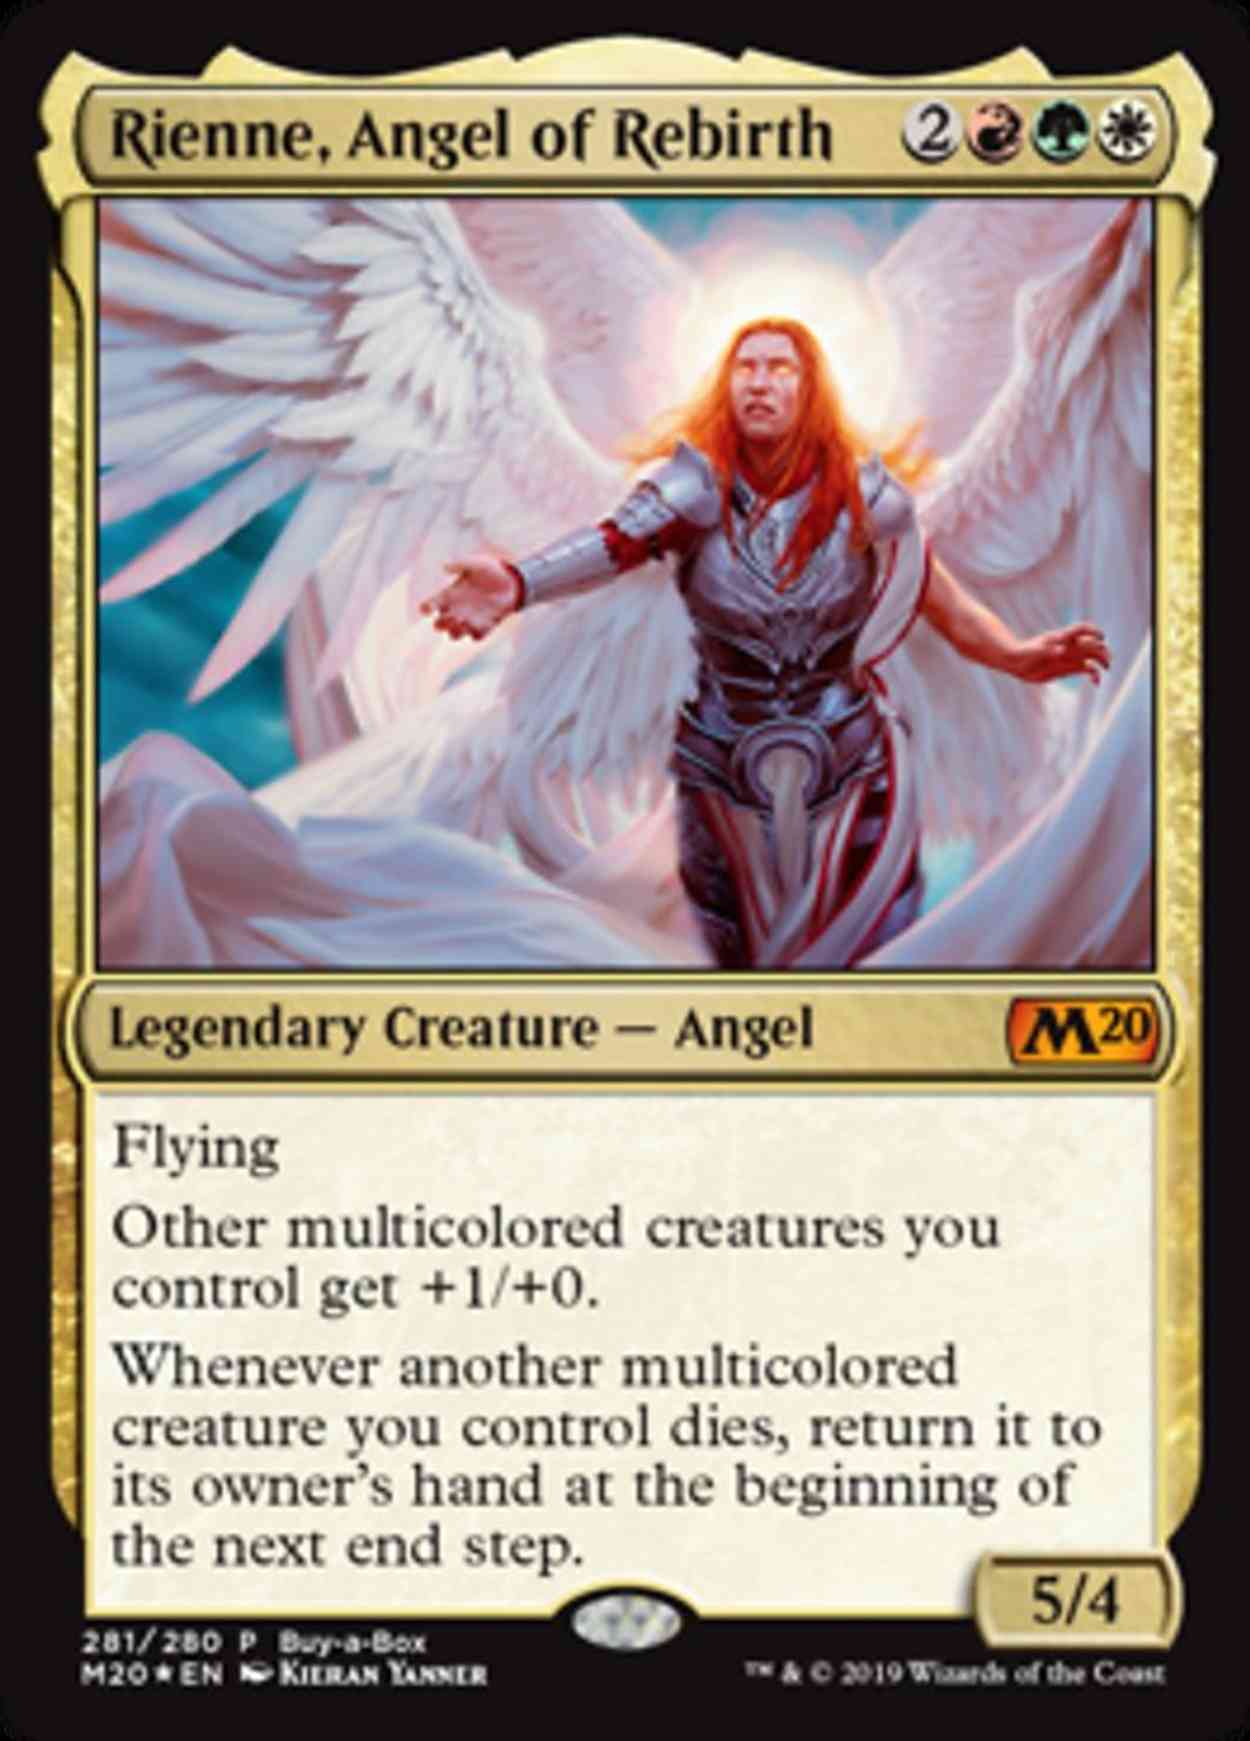 Rienne, Angel of Rebirth magic card front